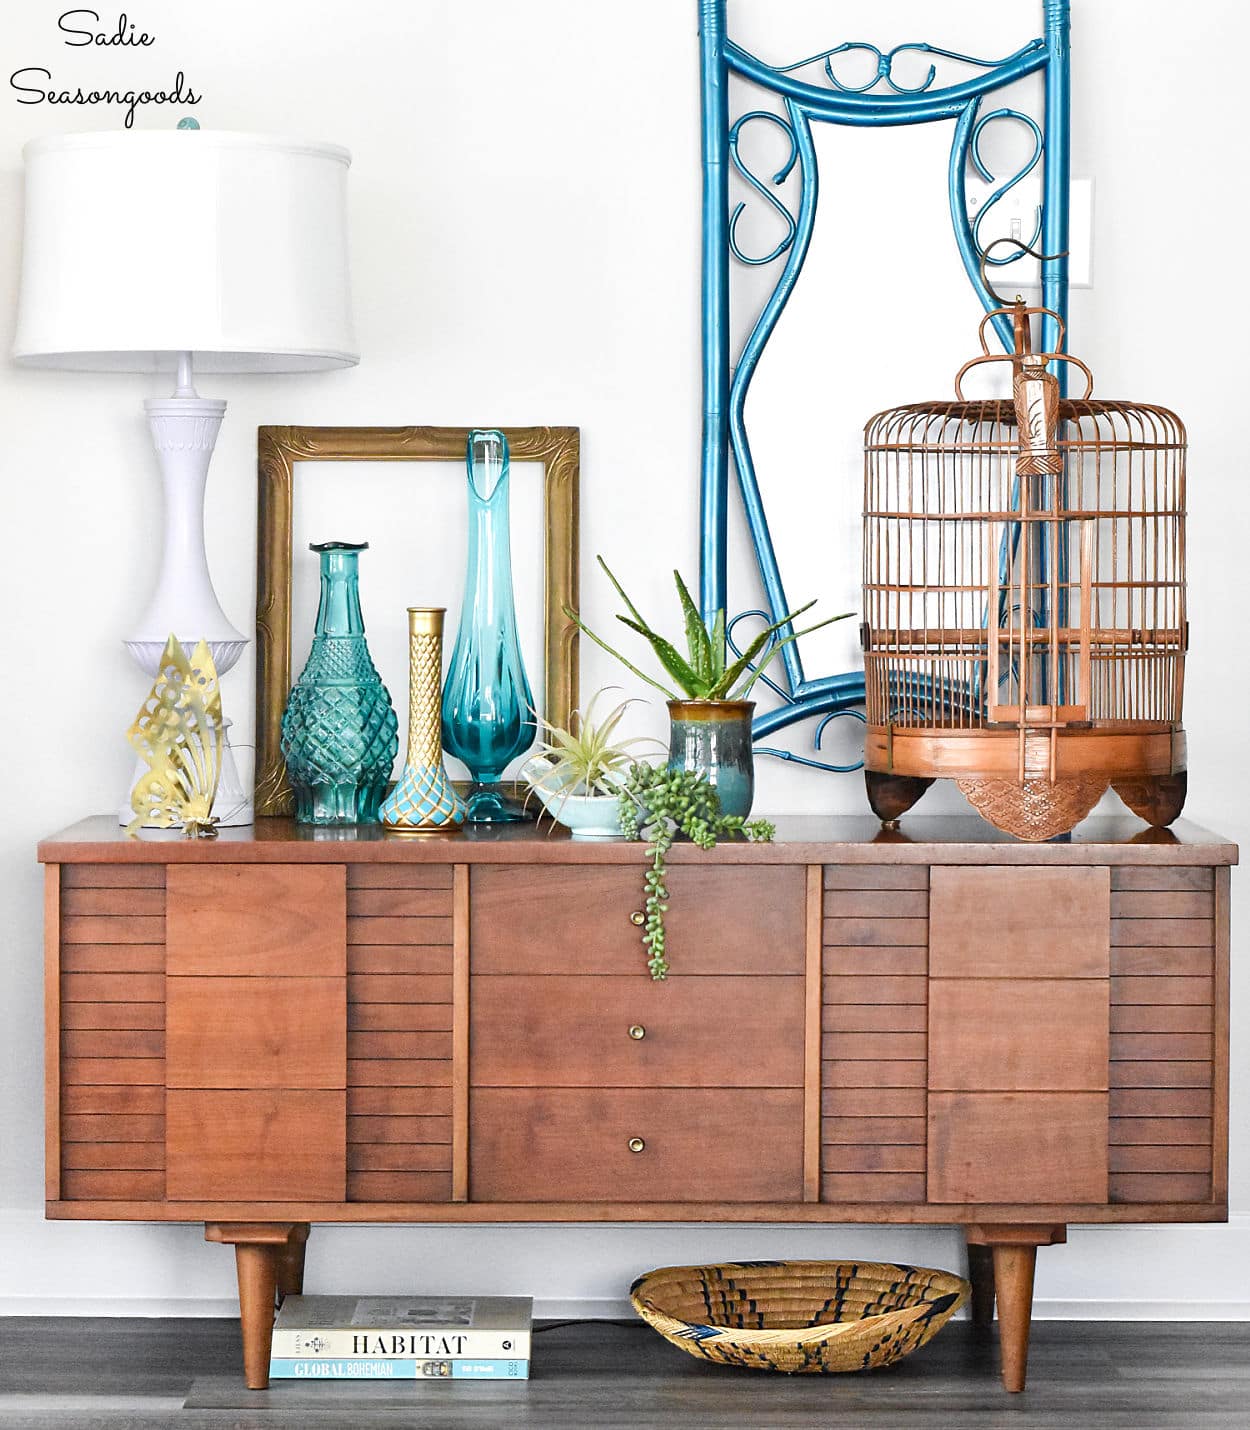 How to Decorate to Thrift the Look, Vintage Boho Style - Lora